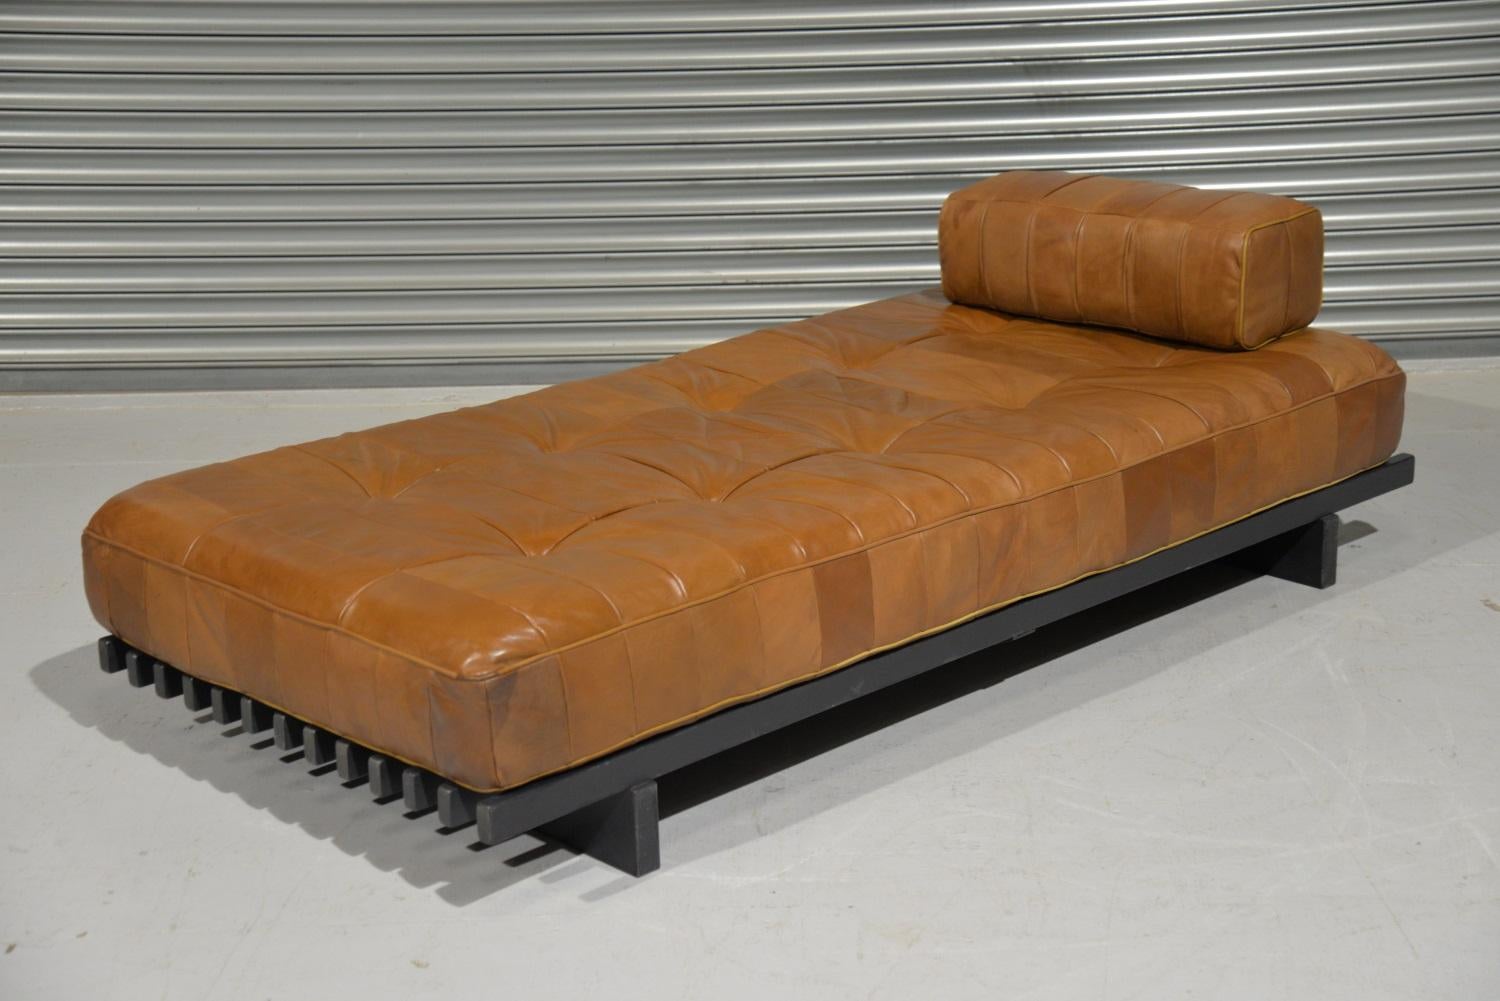 Vintage De Sede DS 80 Leather Patchwork Daybed, Switzerland, 1960s For Sale 3